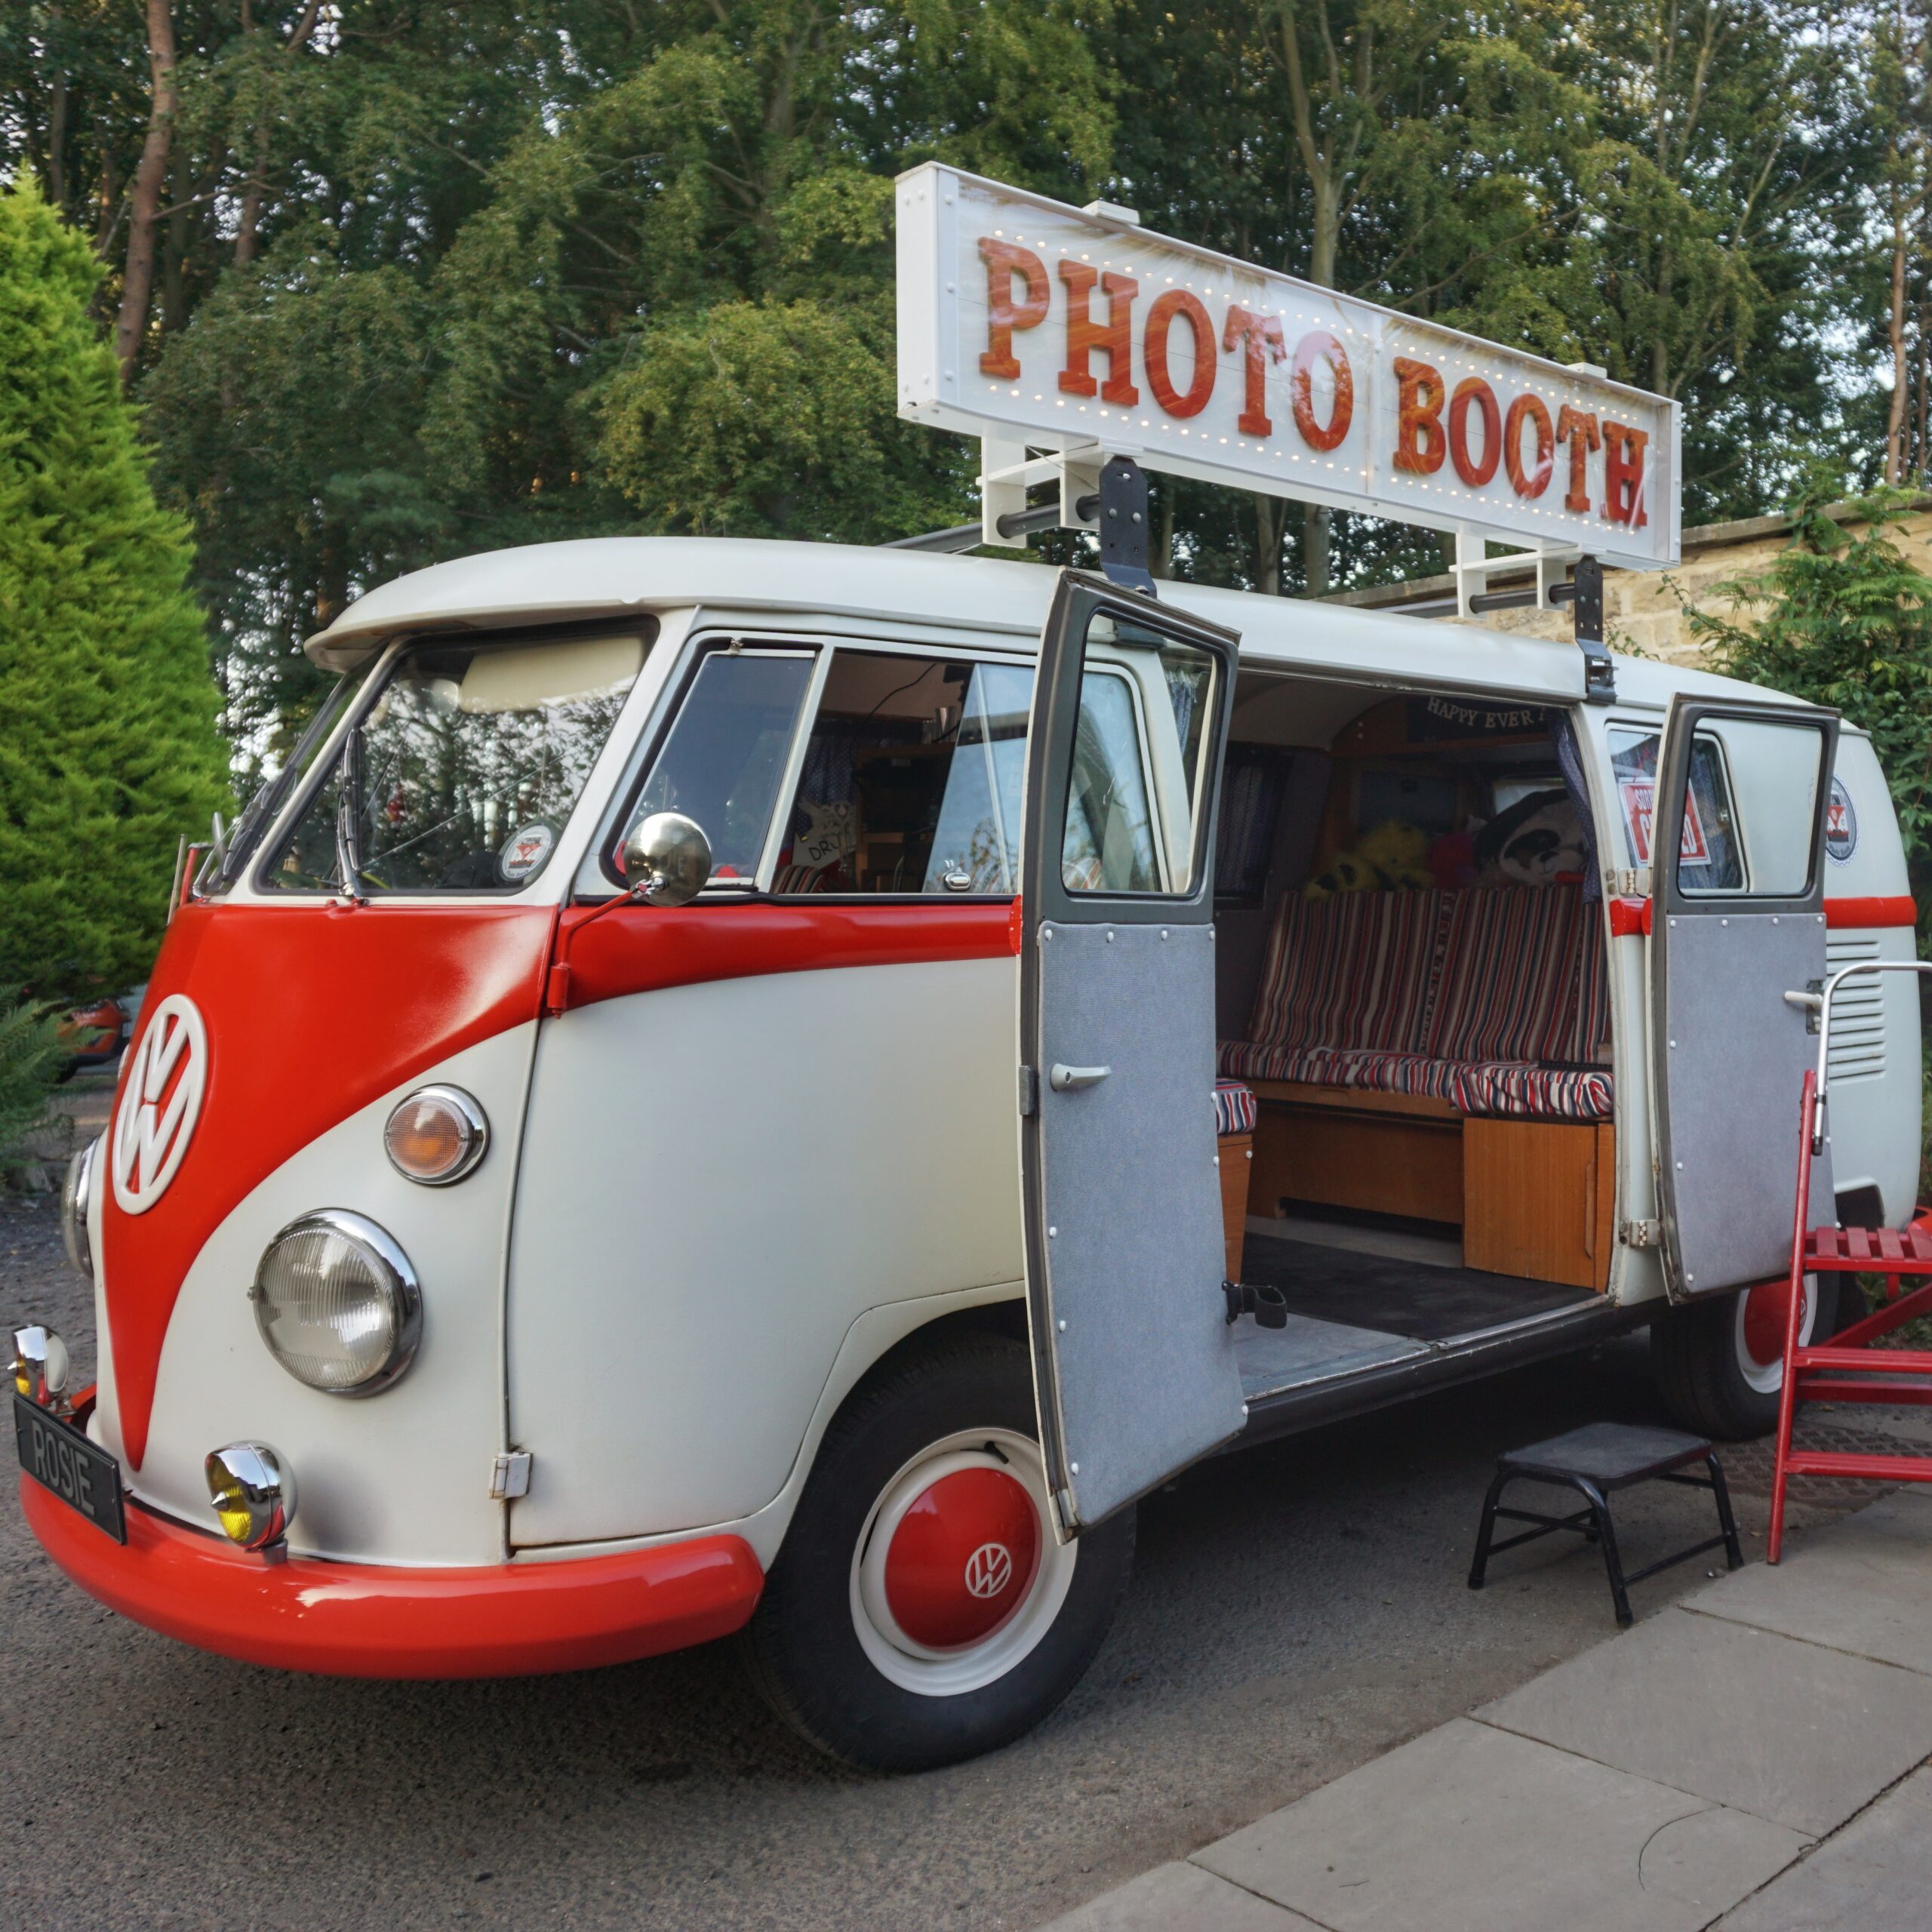 open-air vw campervan photo booth